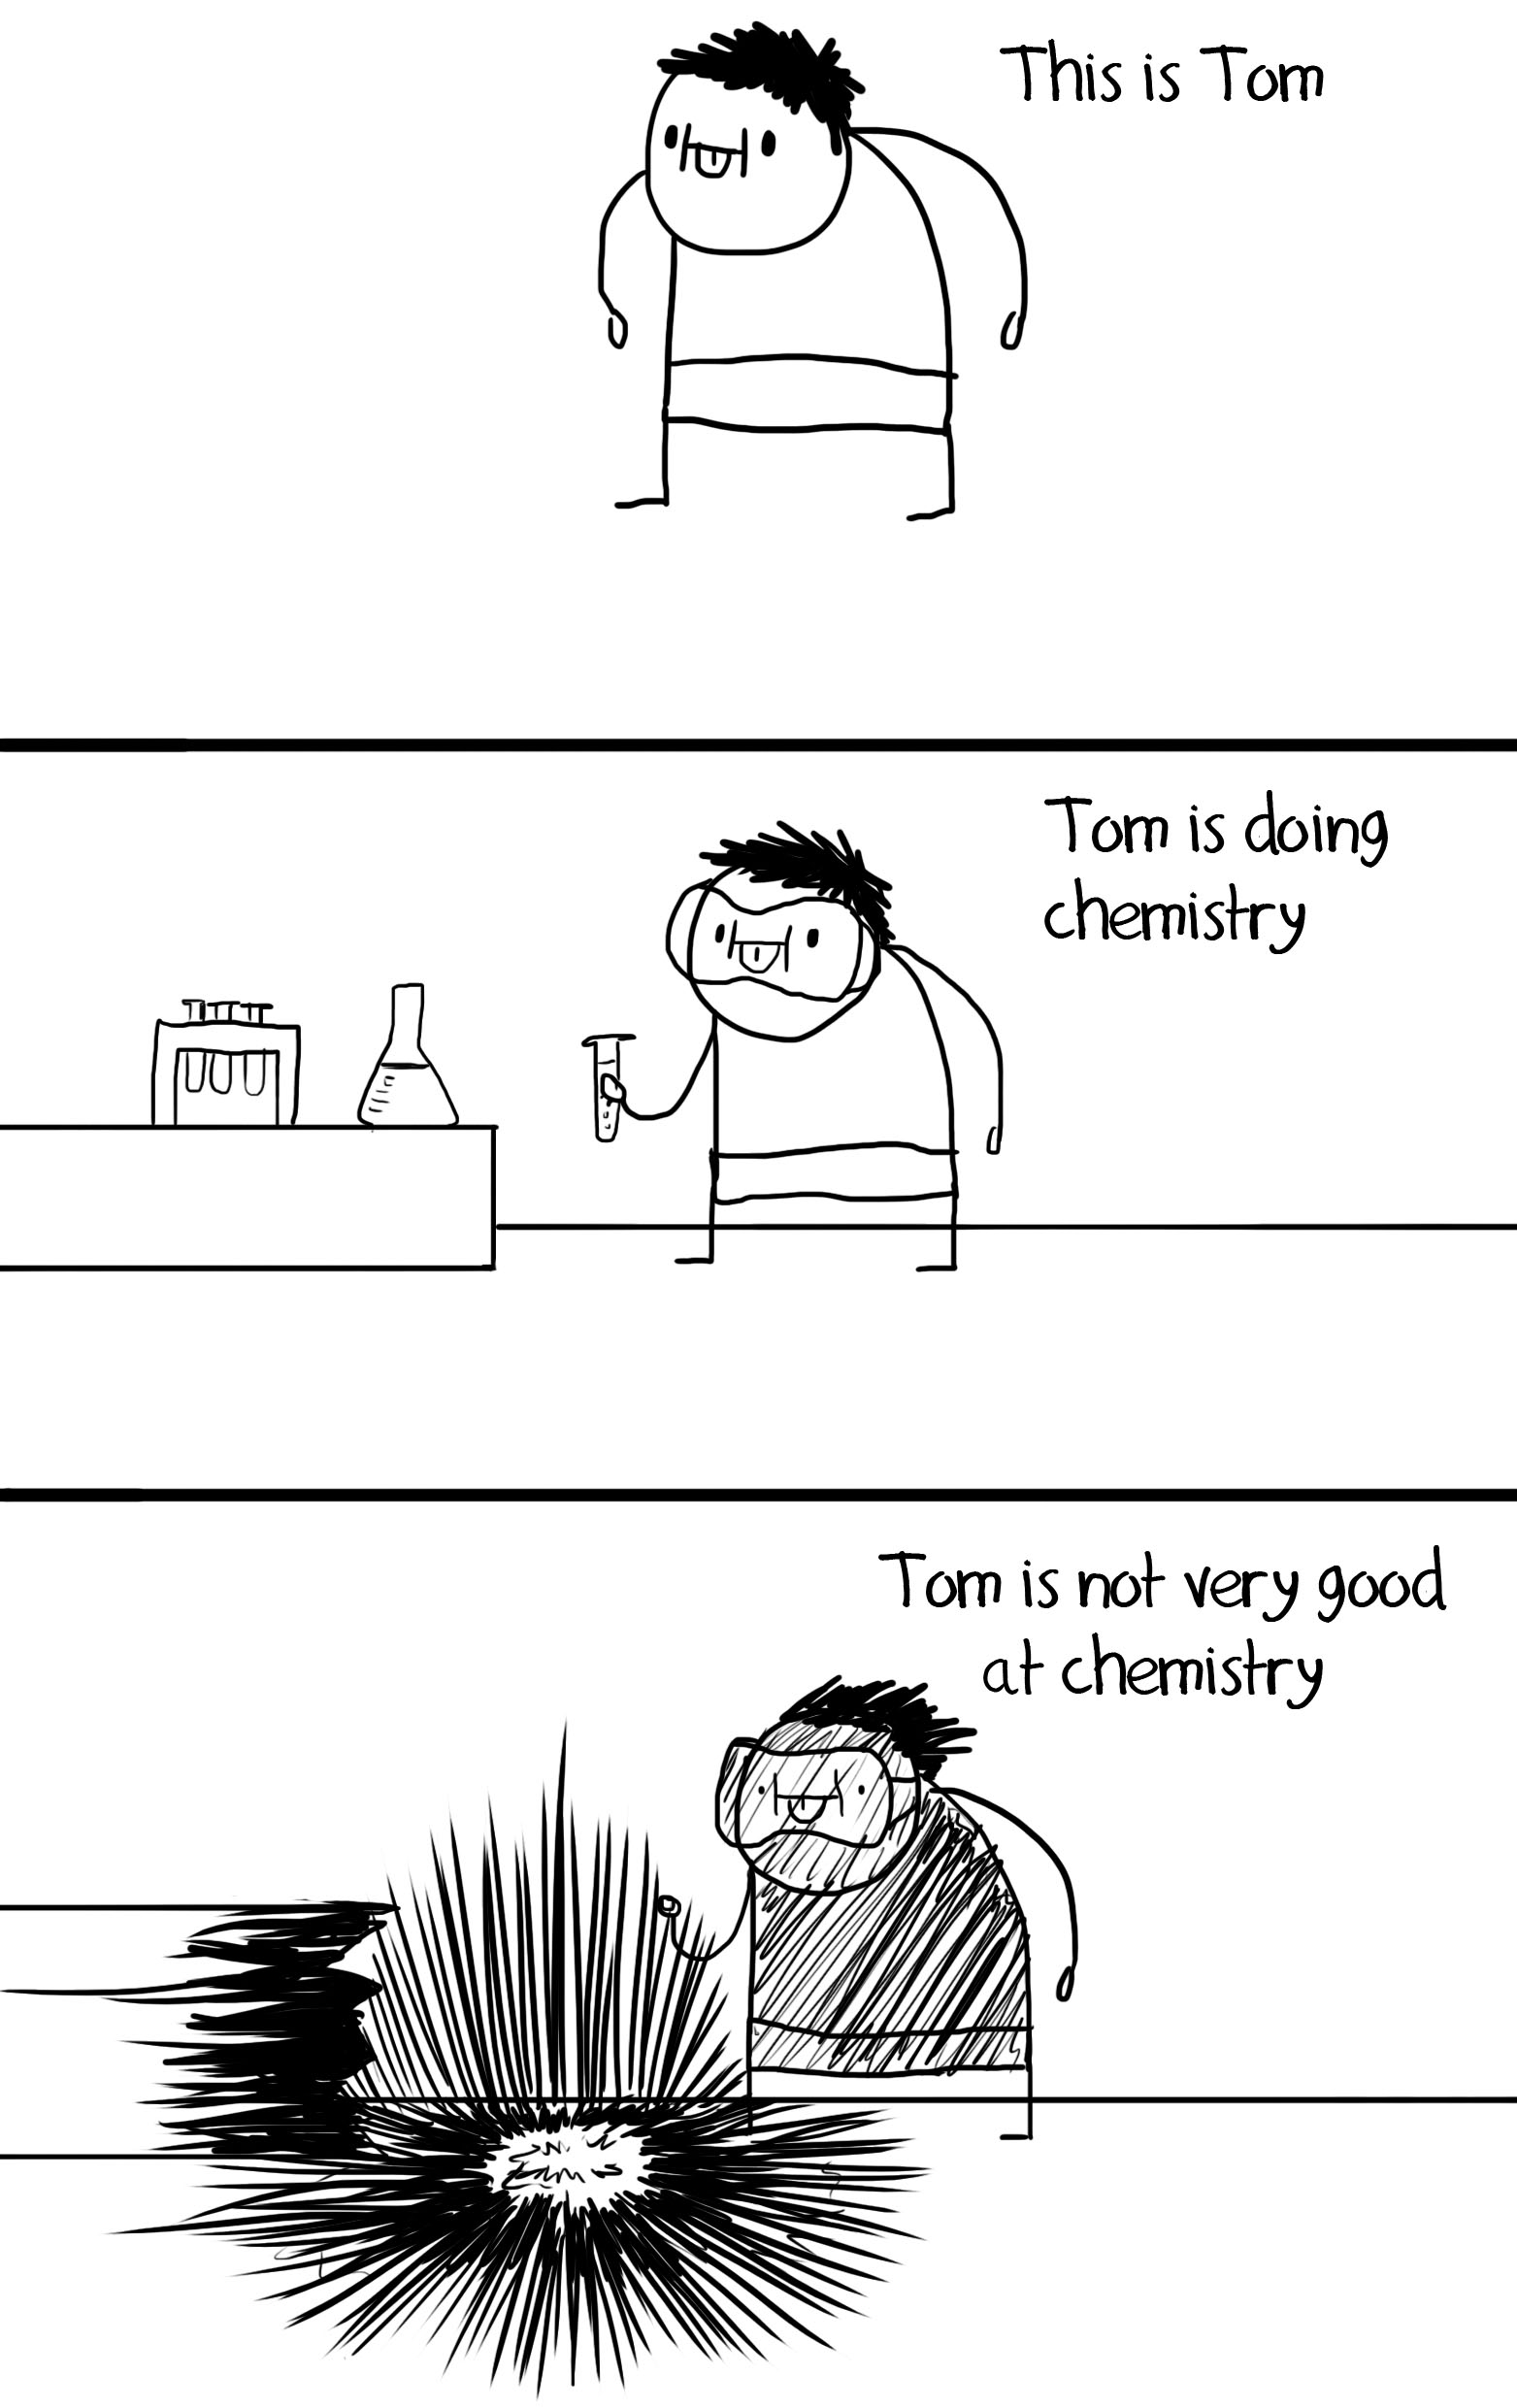 Tom is not very good at chemistry